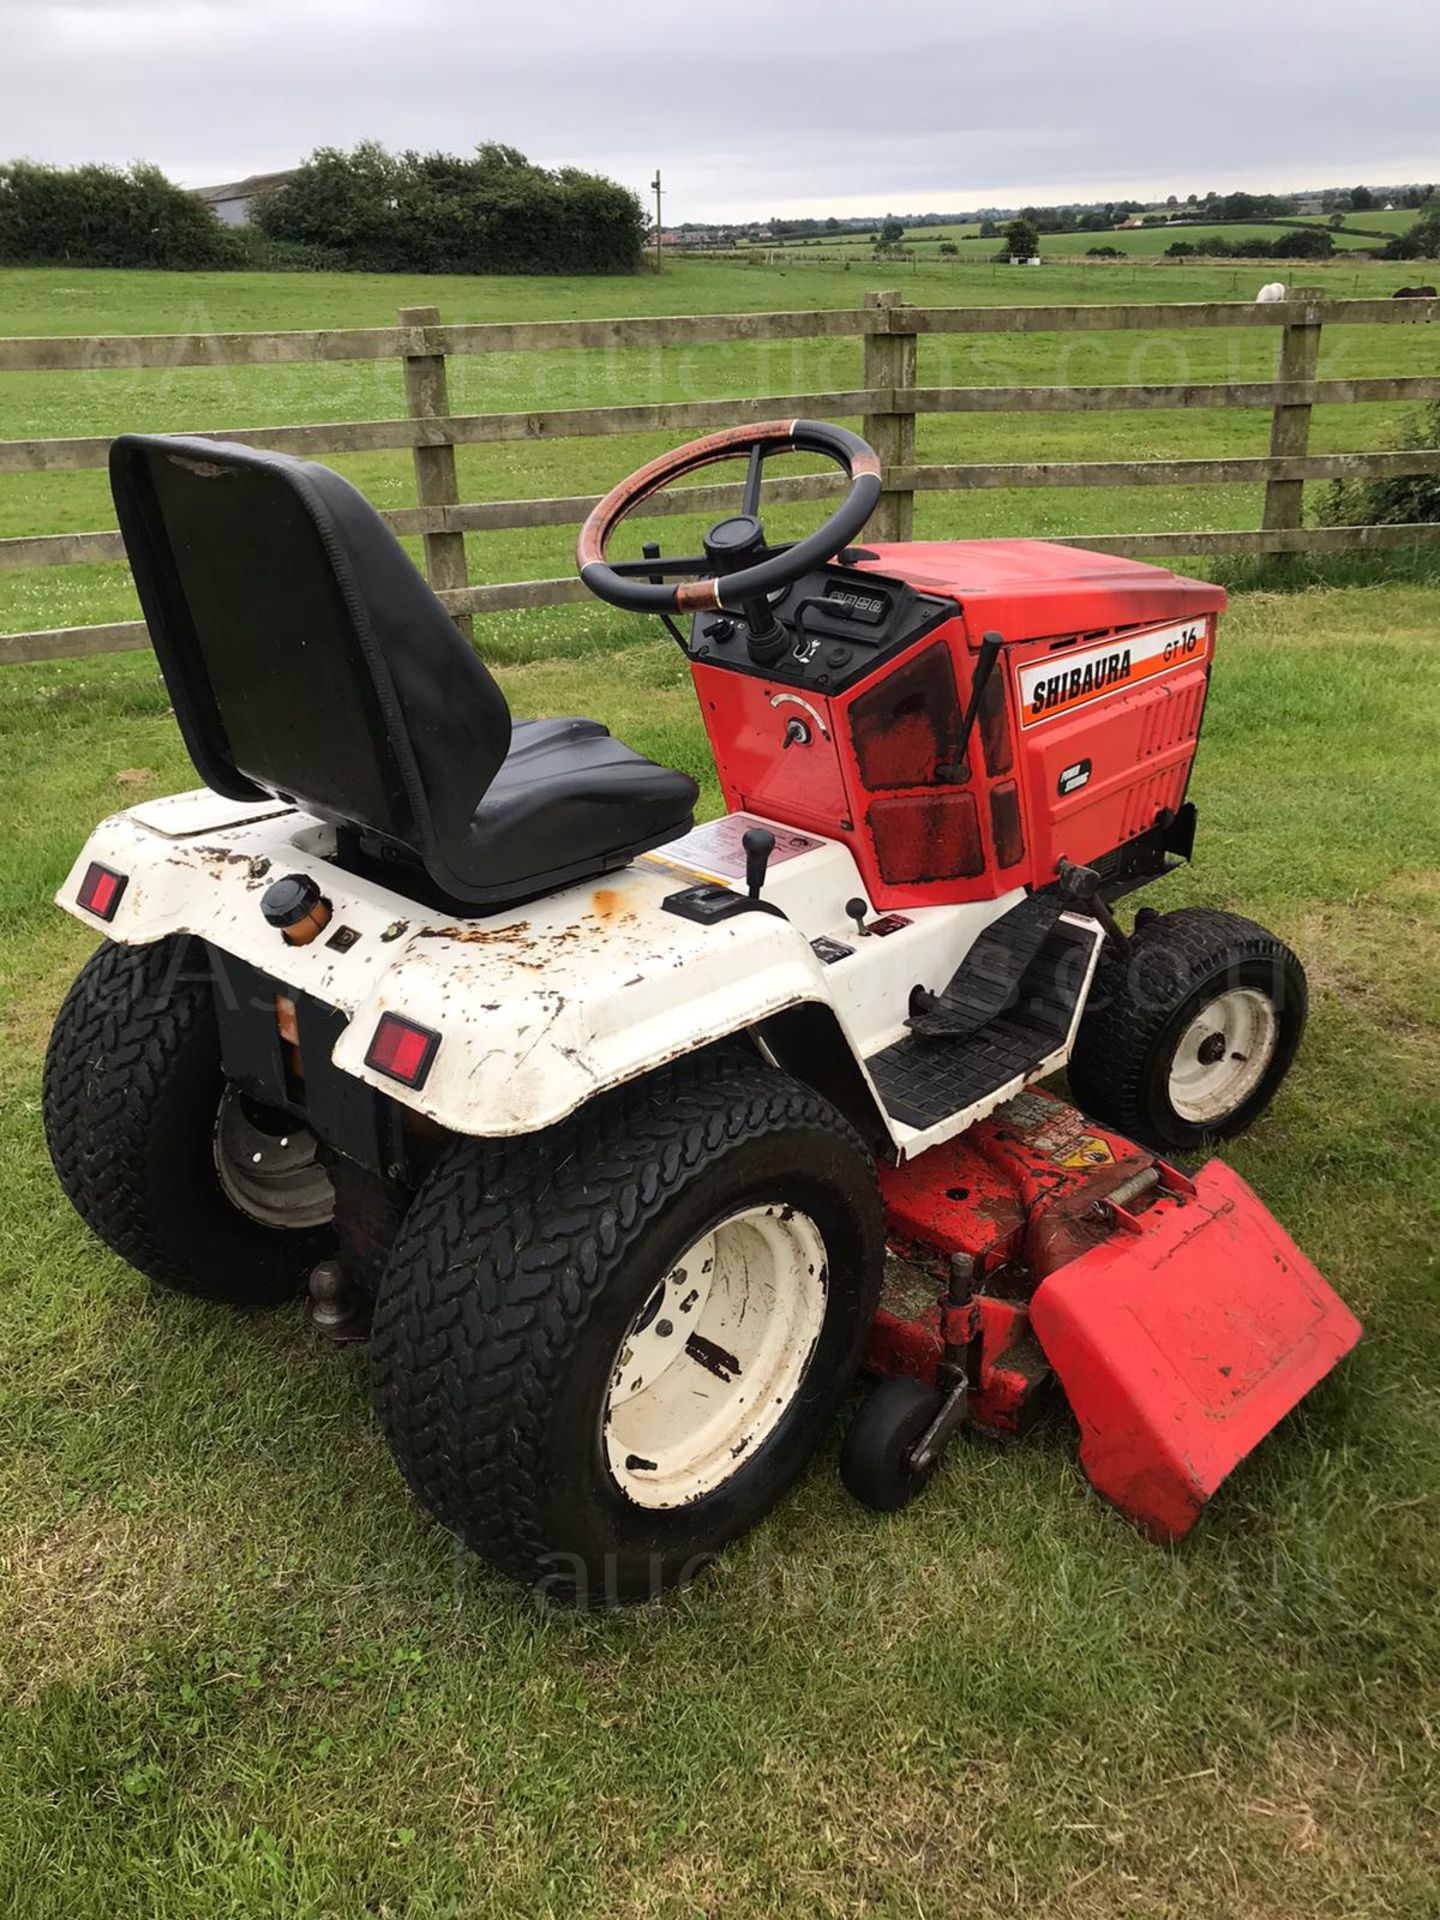 DIESEL SHIBAURA GT16 RIDE ON LAWN MOWER, RUNS, DRIVES AND CUTS, HYDROSTATIC DRIVE, *NO VAT* - Image 4 of 5